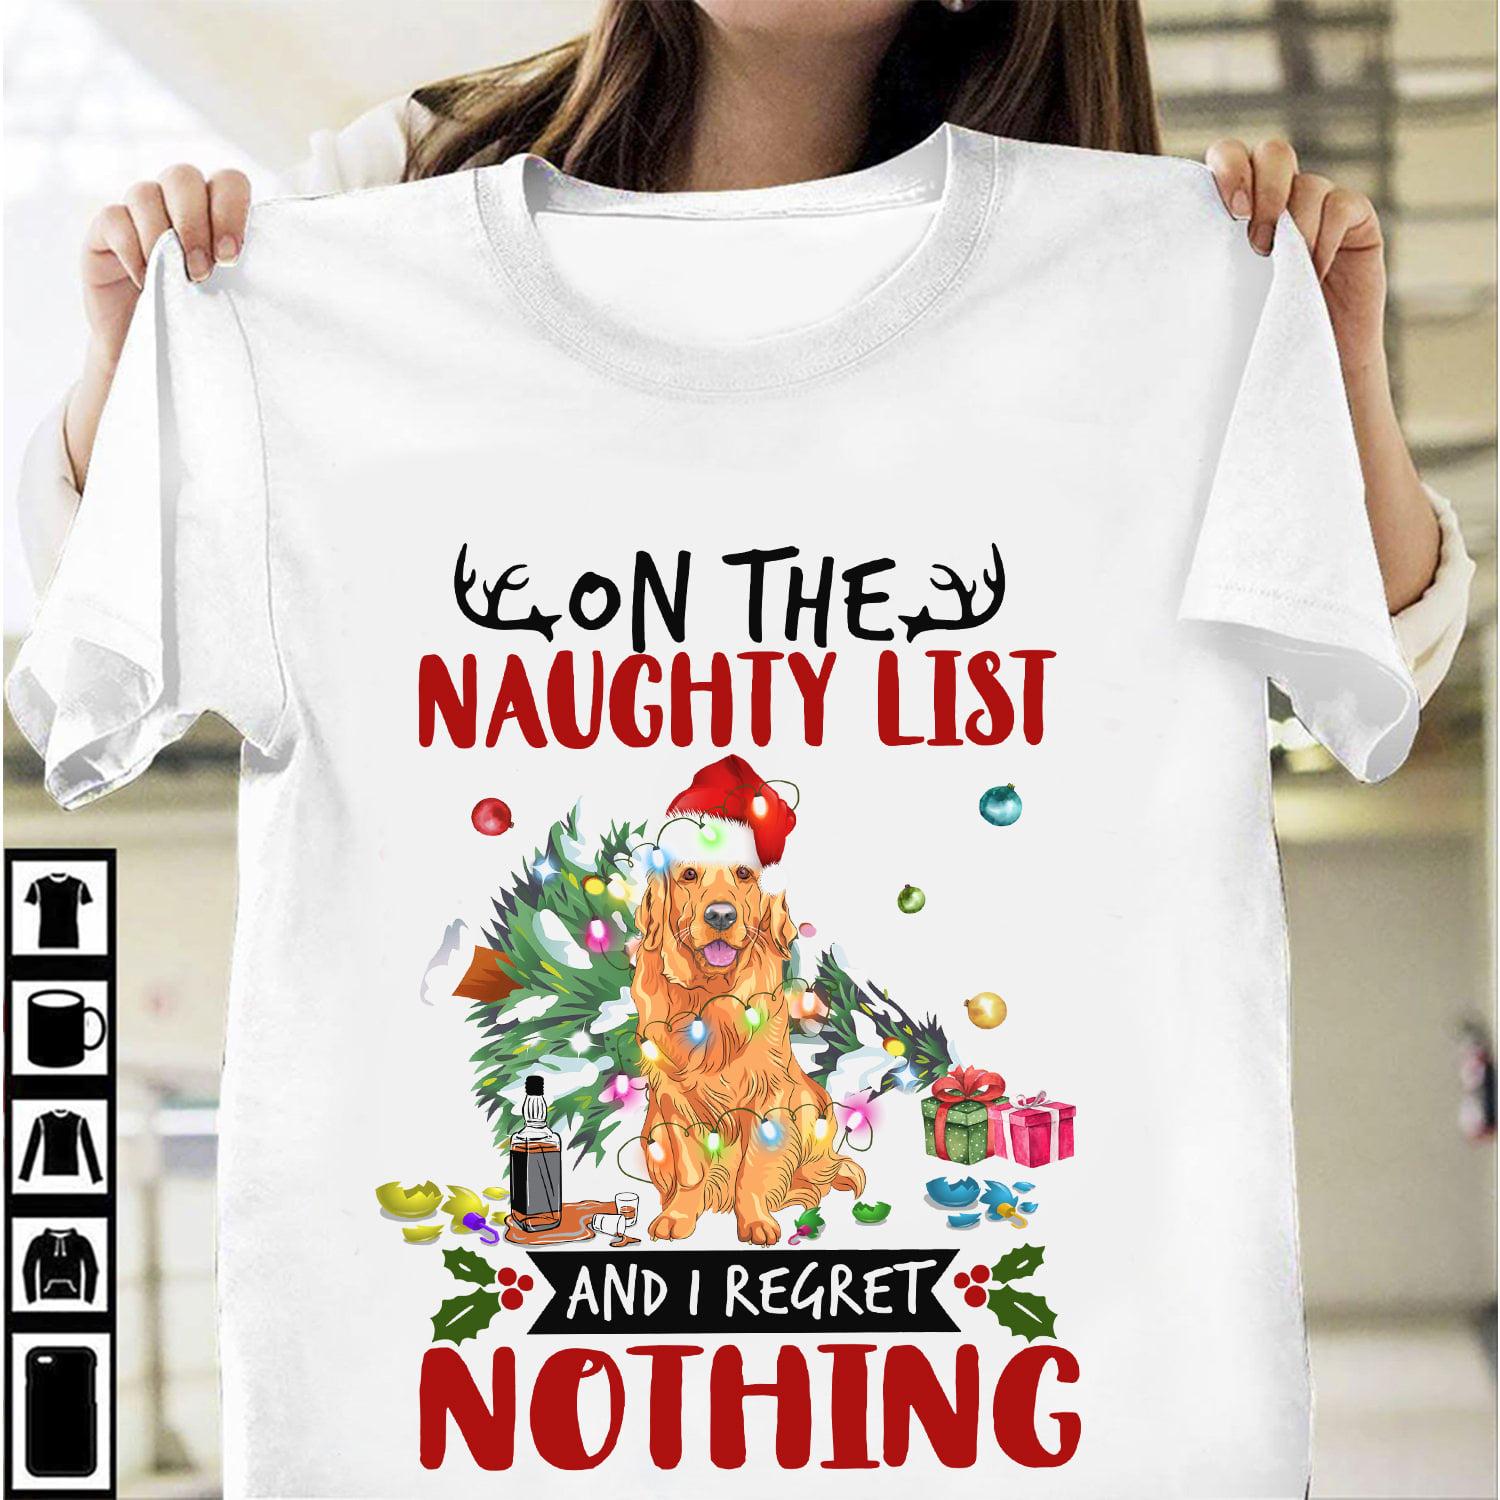 On the naughty list and I regret nothing - Naughty golden dog, Christmas day tree, Santa Claus naughty list